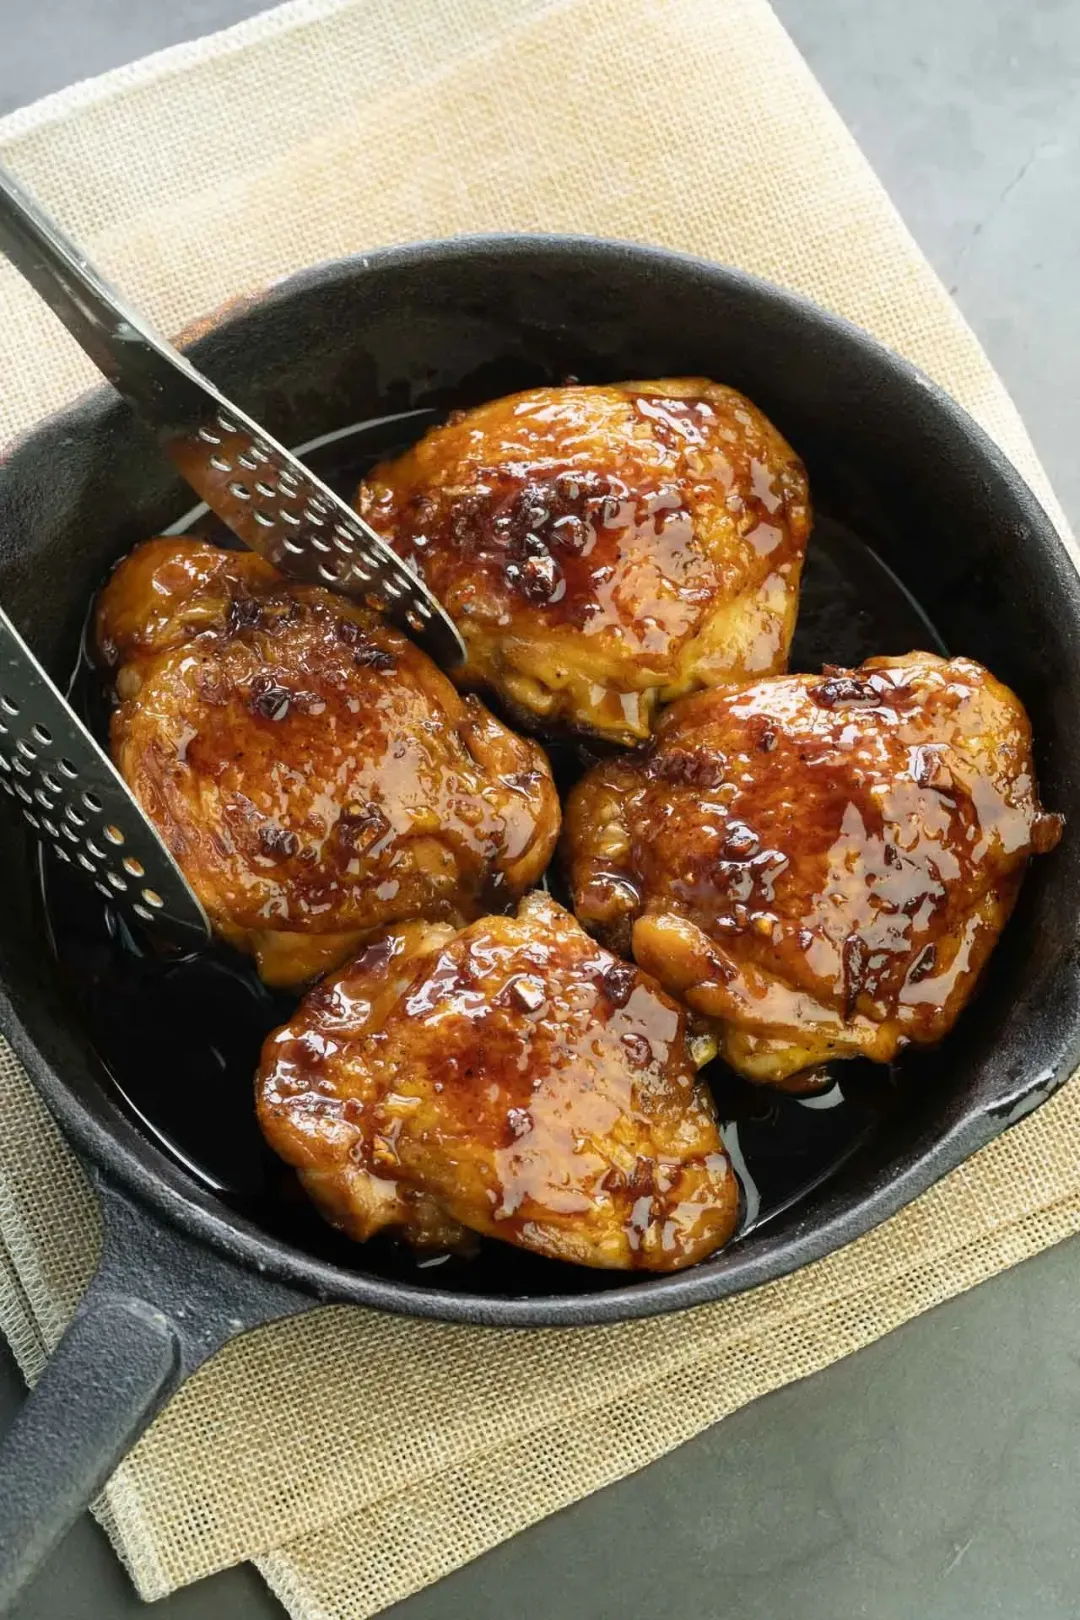 Glossy grilled chicken in a honey-chili glaze in a black skillet on a piece of kitchen cloth